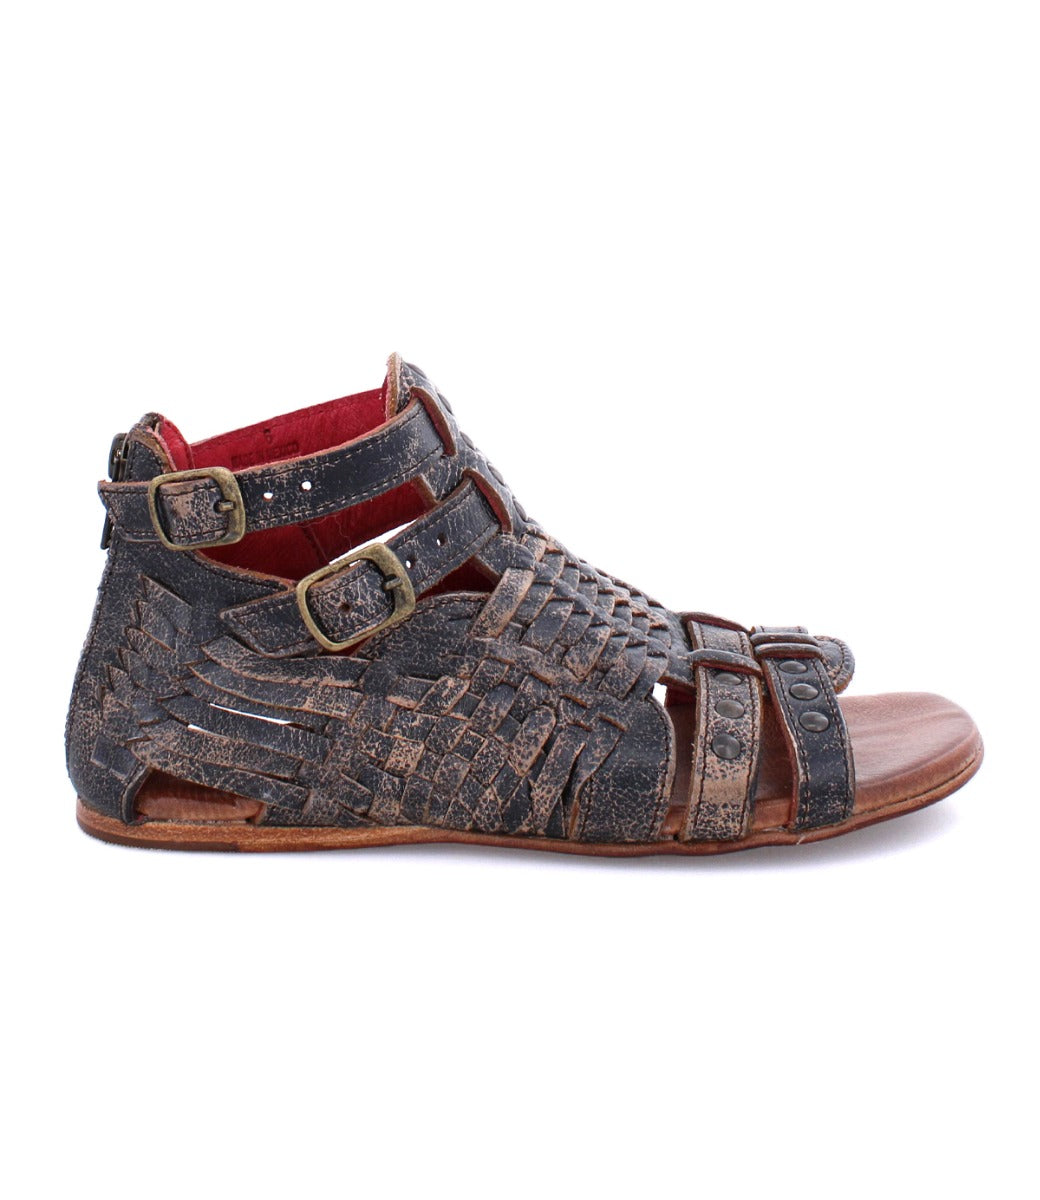 A pair of Bed Stu Claire III brown sandals with braided straps.